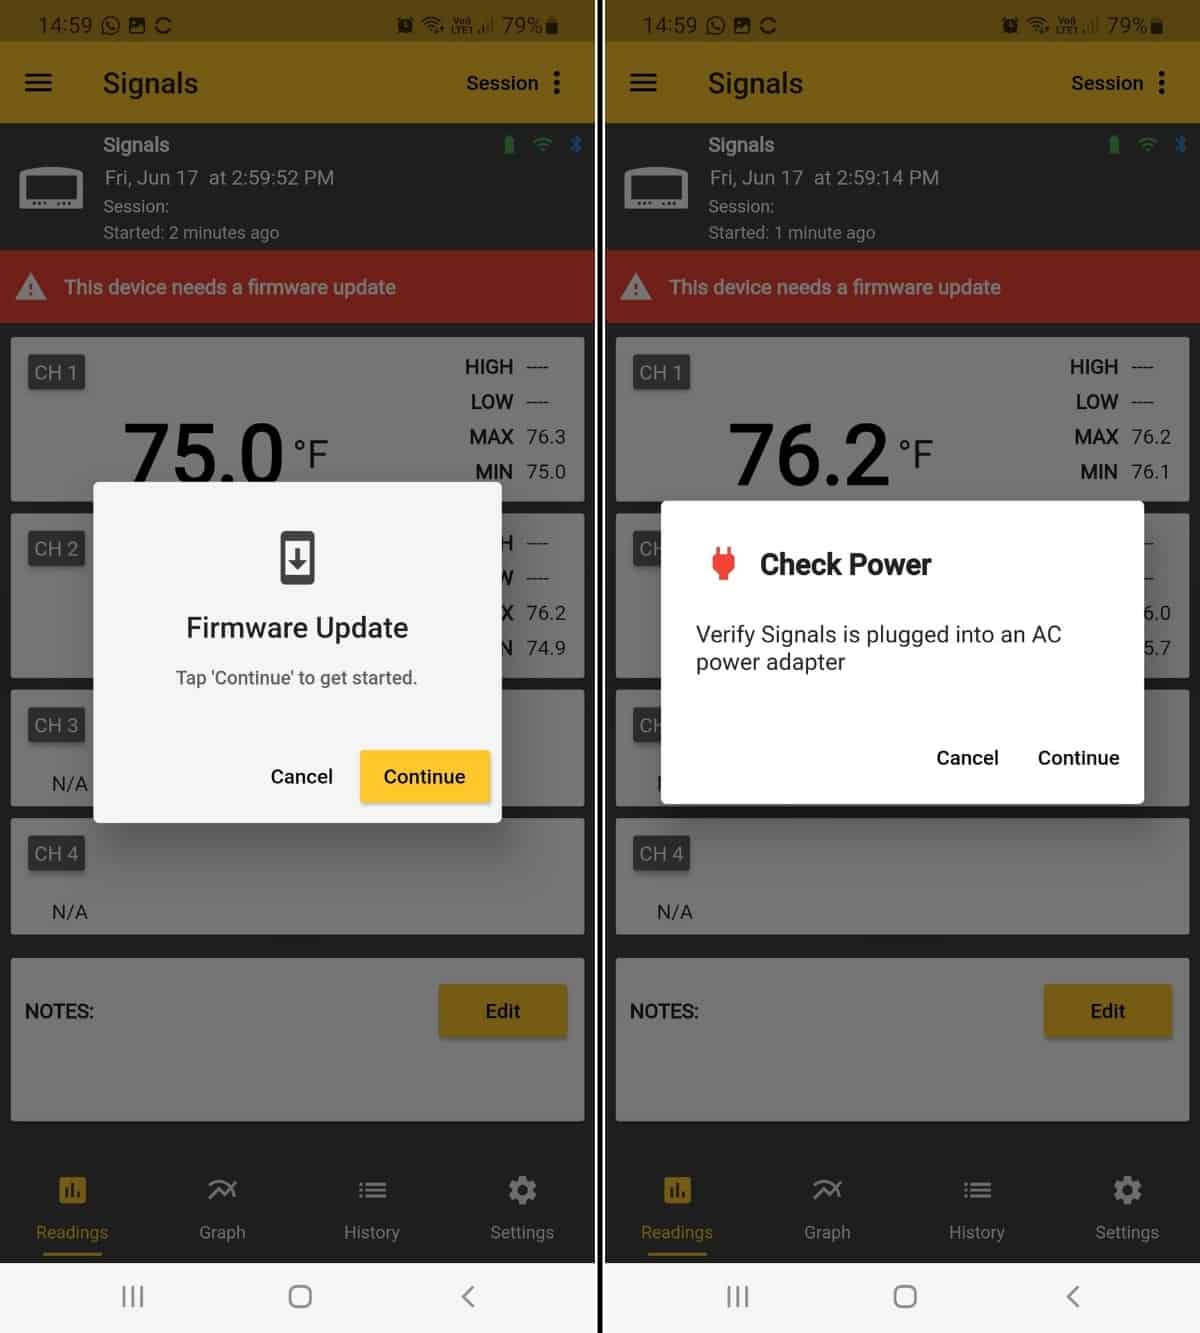 Thermoworks app screenshots showing the firmware update process, stages 1 and 2.